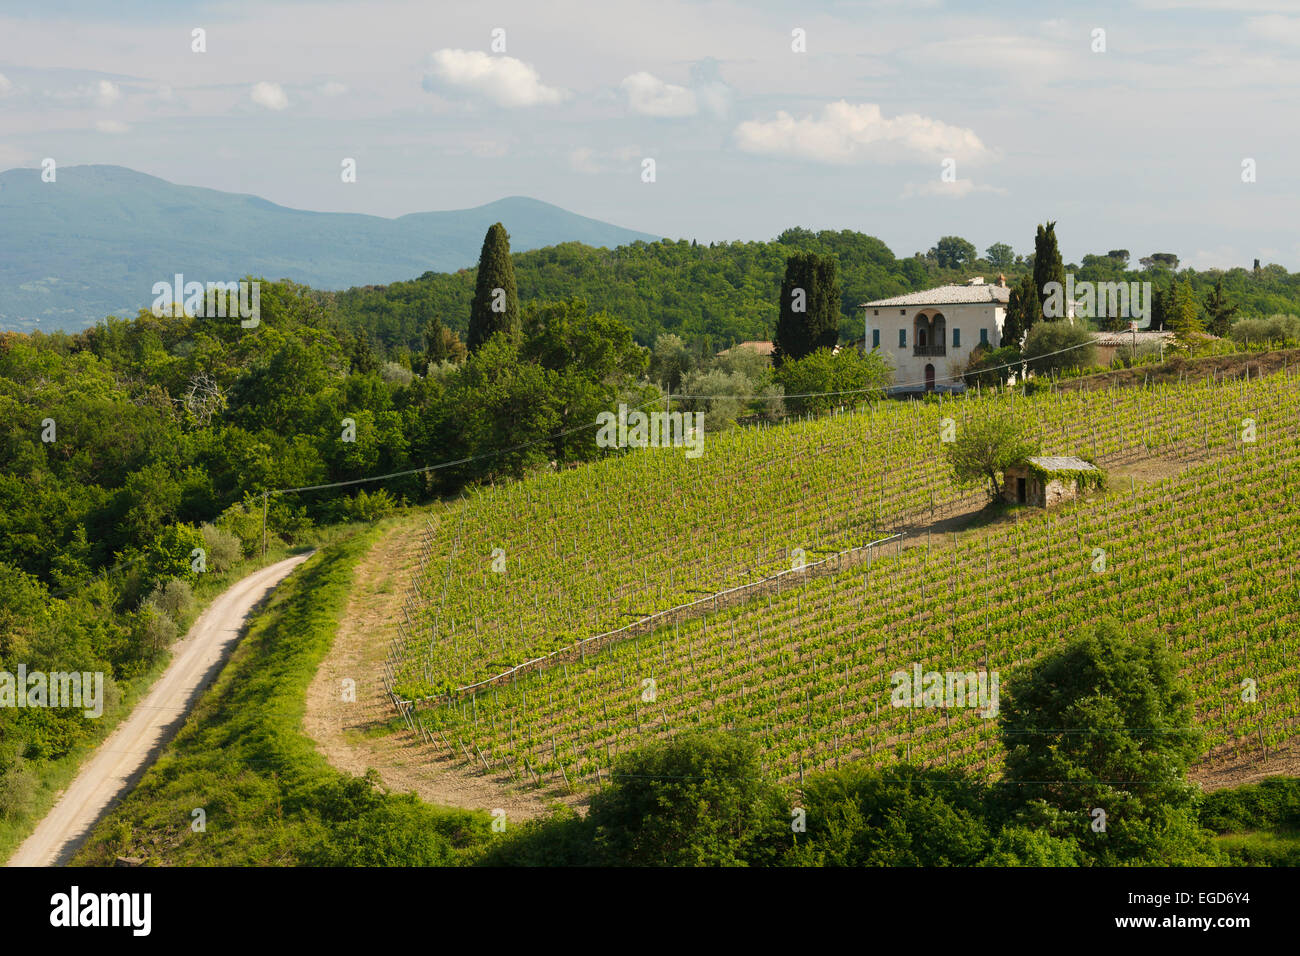 Vineyard and country manor surrounded by cypresses, near Montalcino, Province of Siena, Tuscany, Italy, Europe Stock Photo